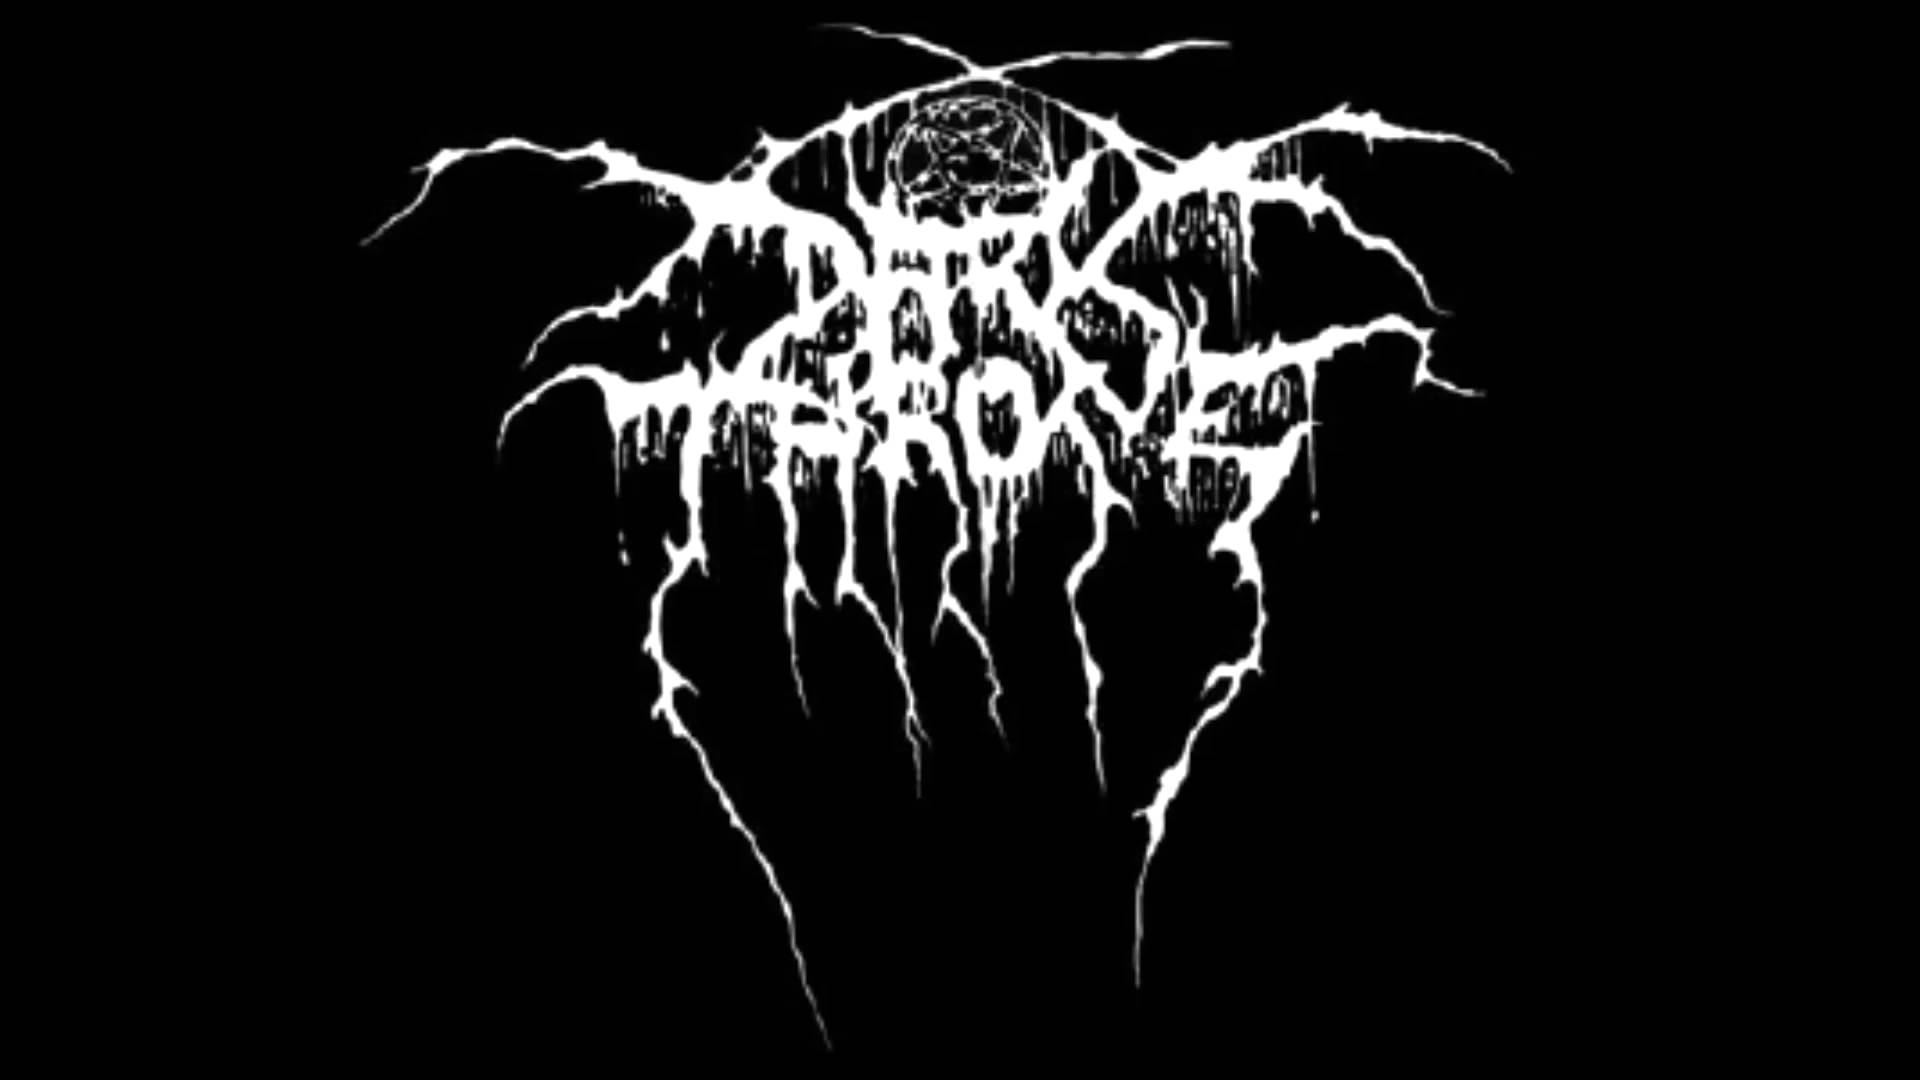 Black metal overlords Darkthrone will share a new song today